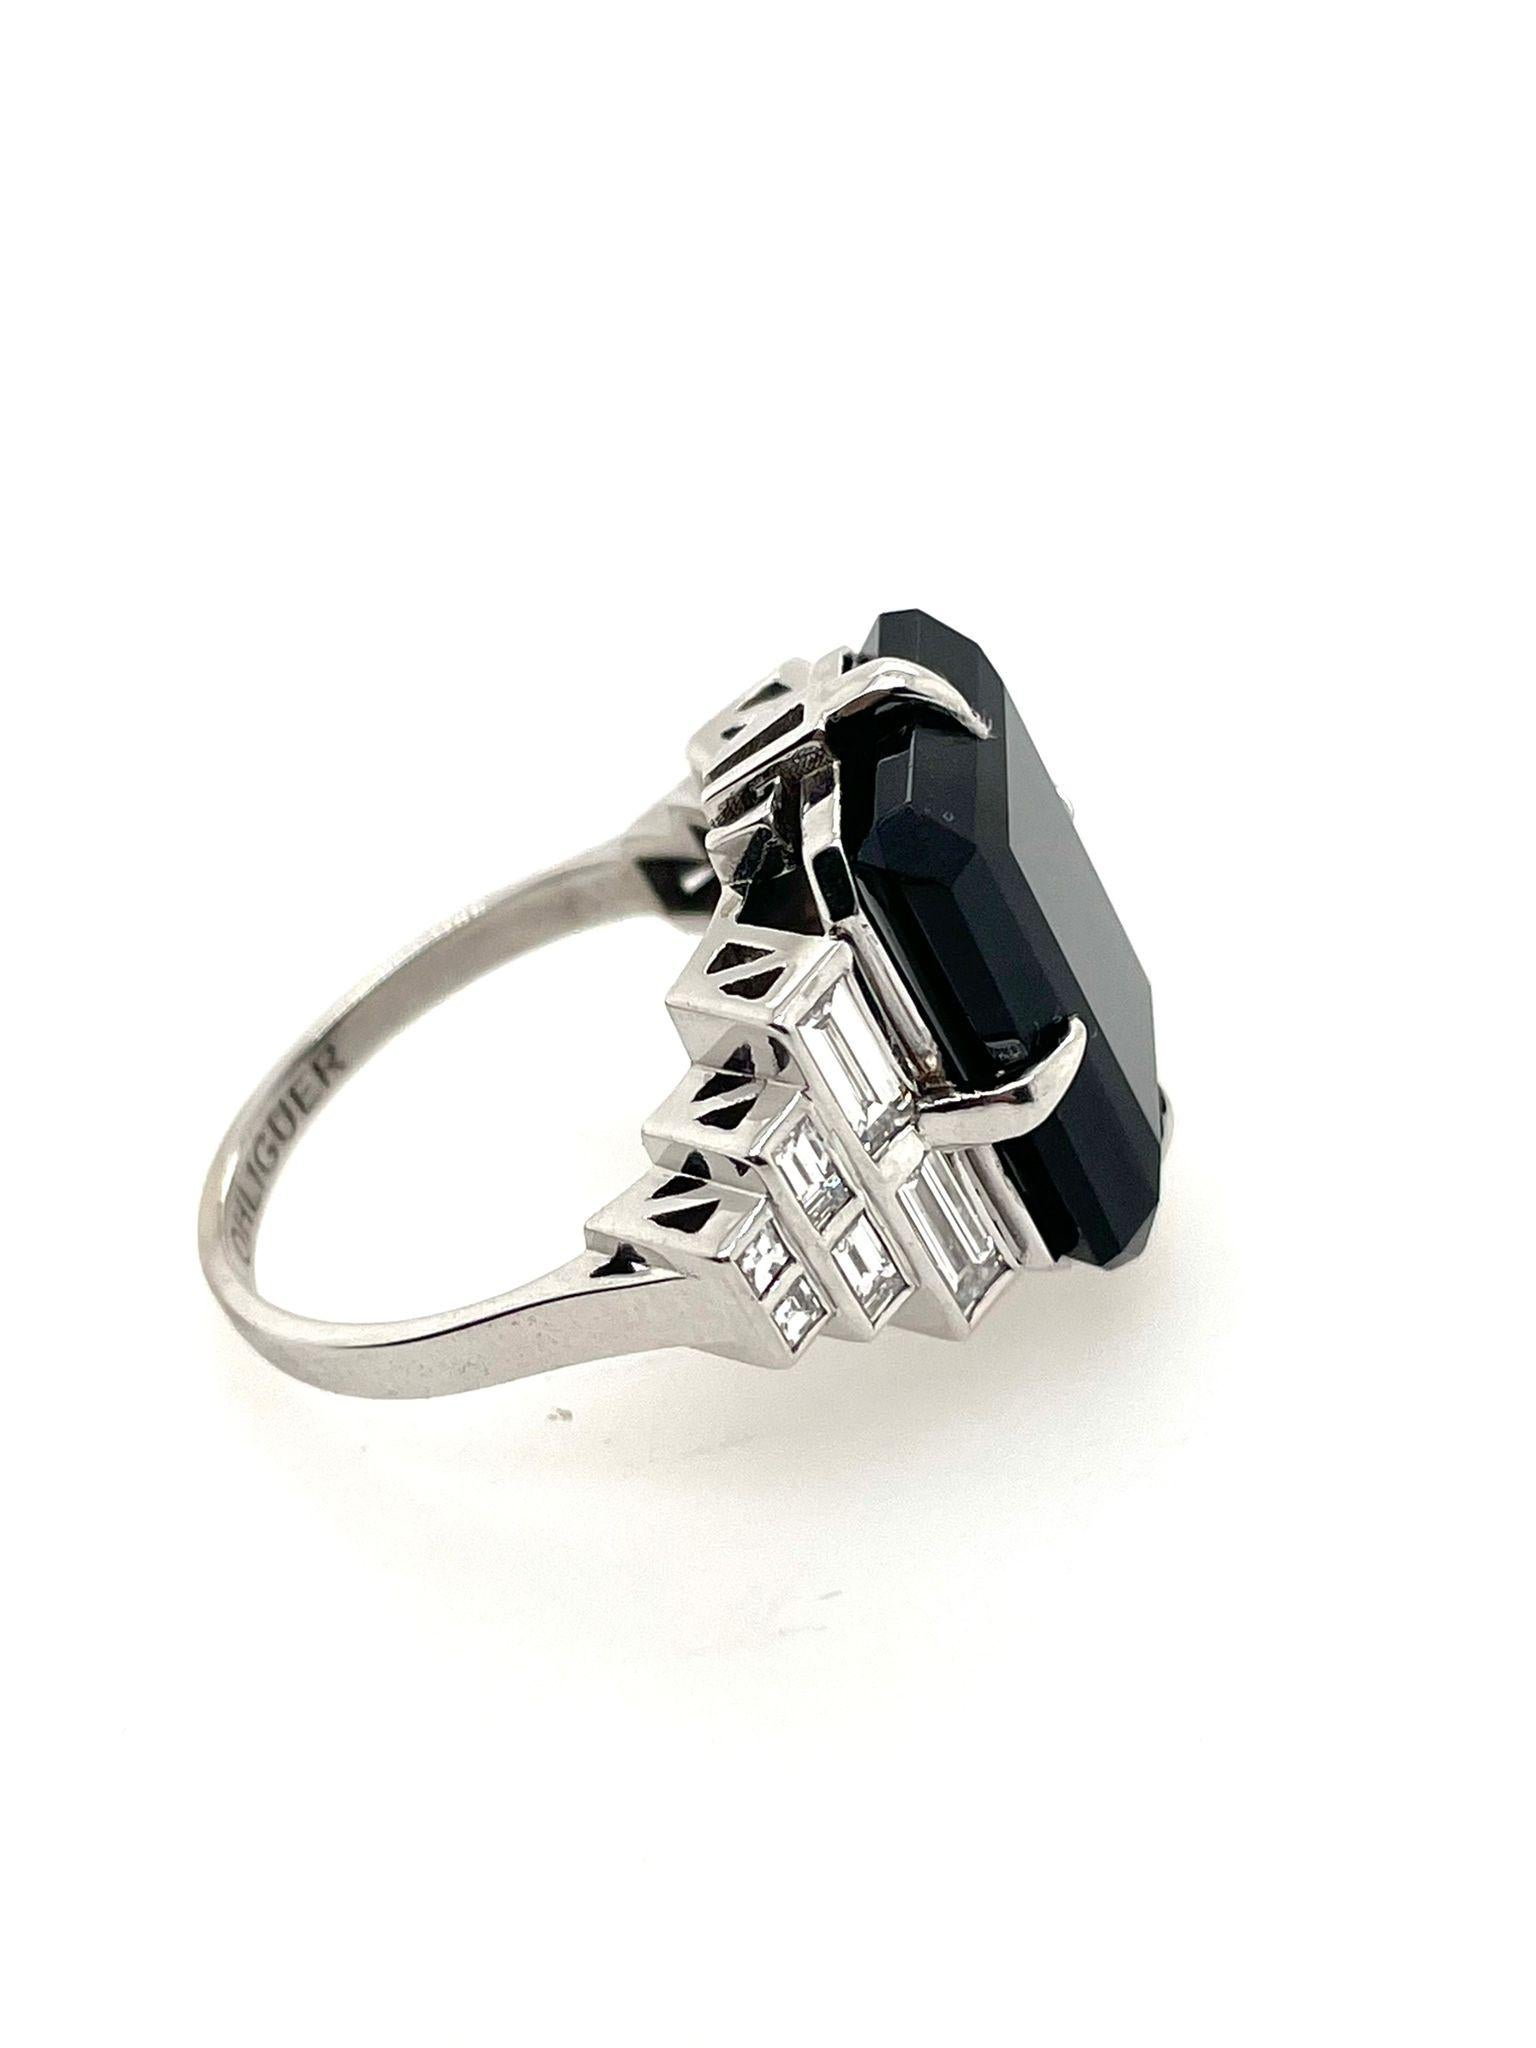 For Sale:  Diamond and Onyx Art Deco Ring with Baguette Diamonds 4